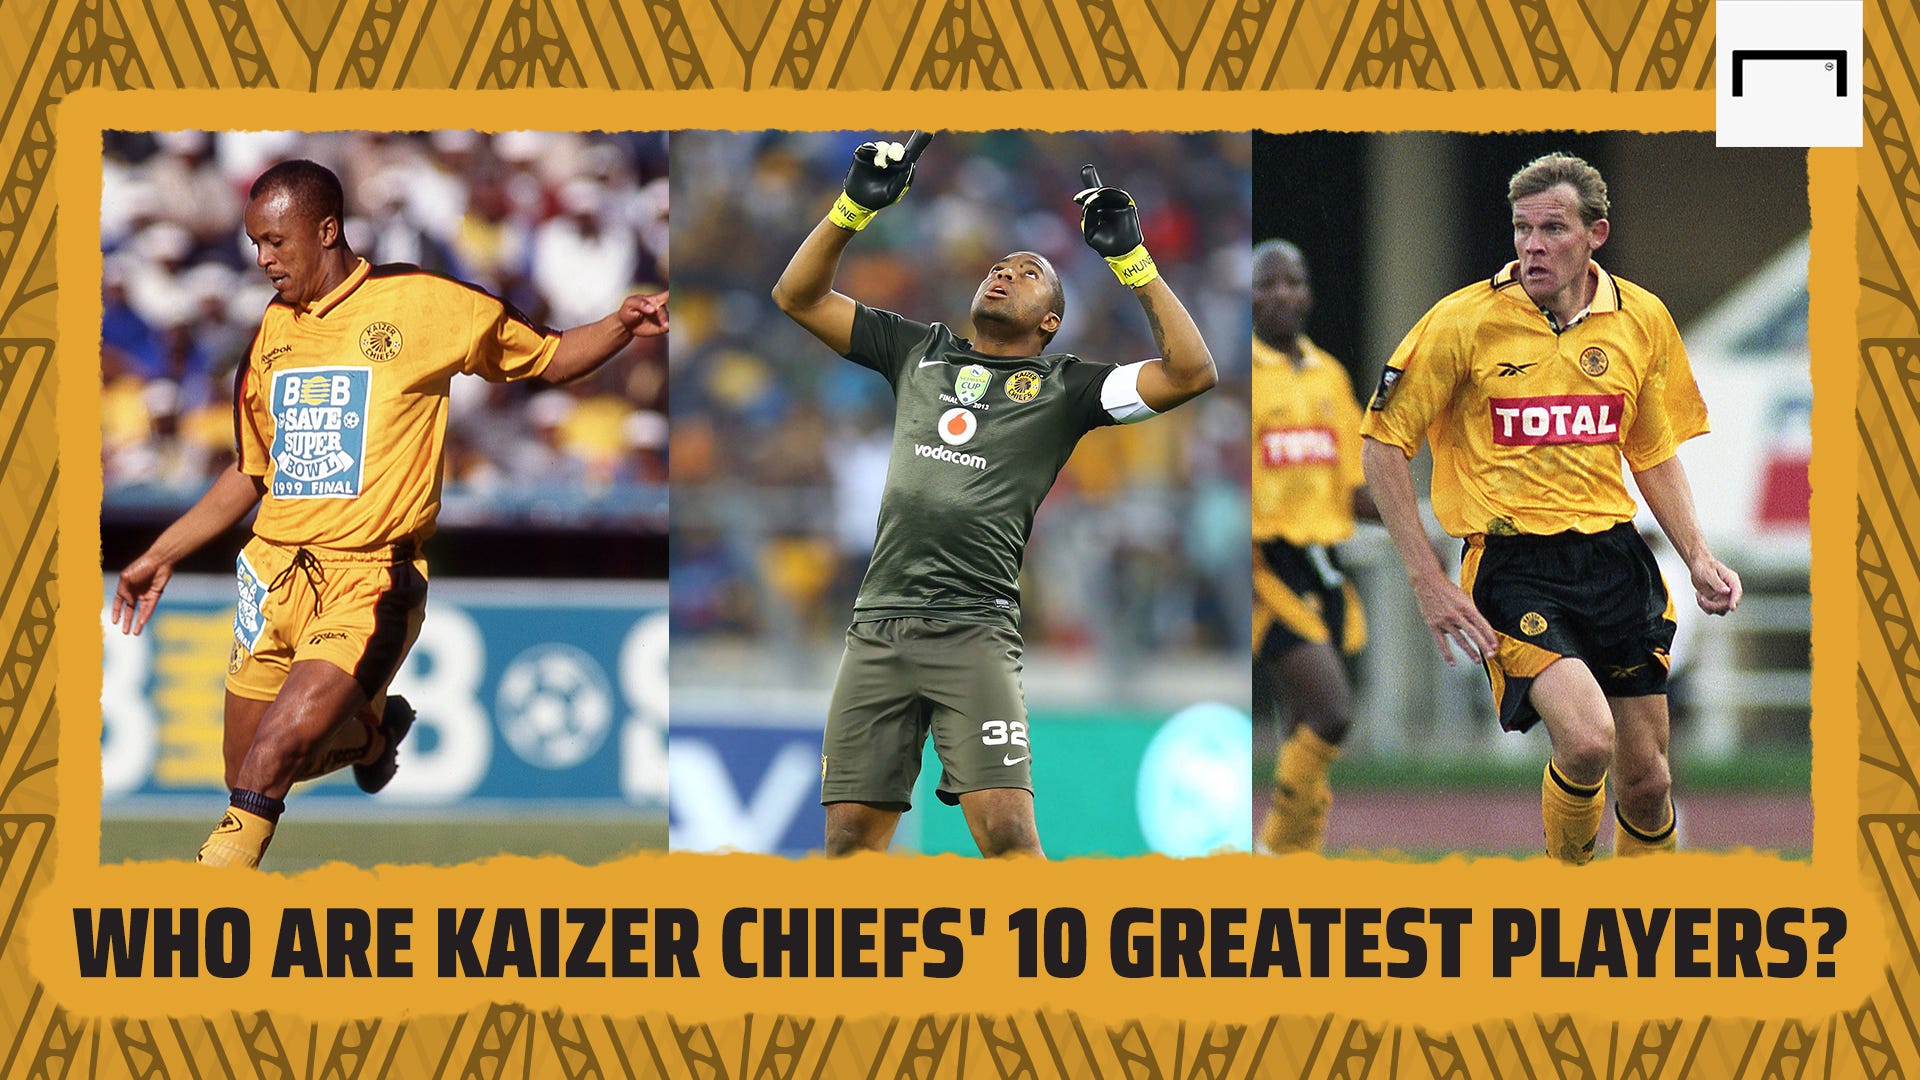 Who are Kaizer Chiefs' 10 greatest players?